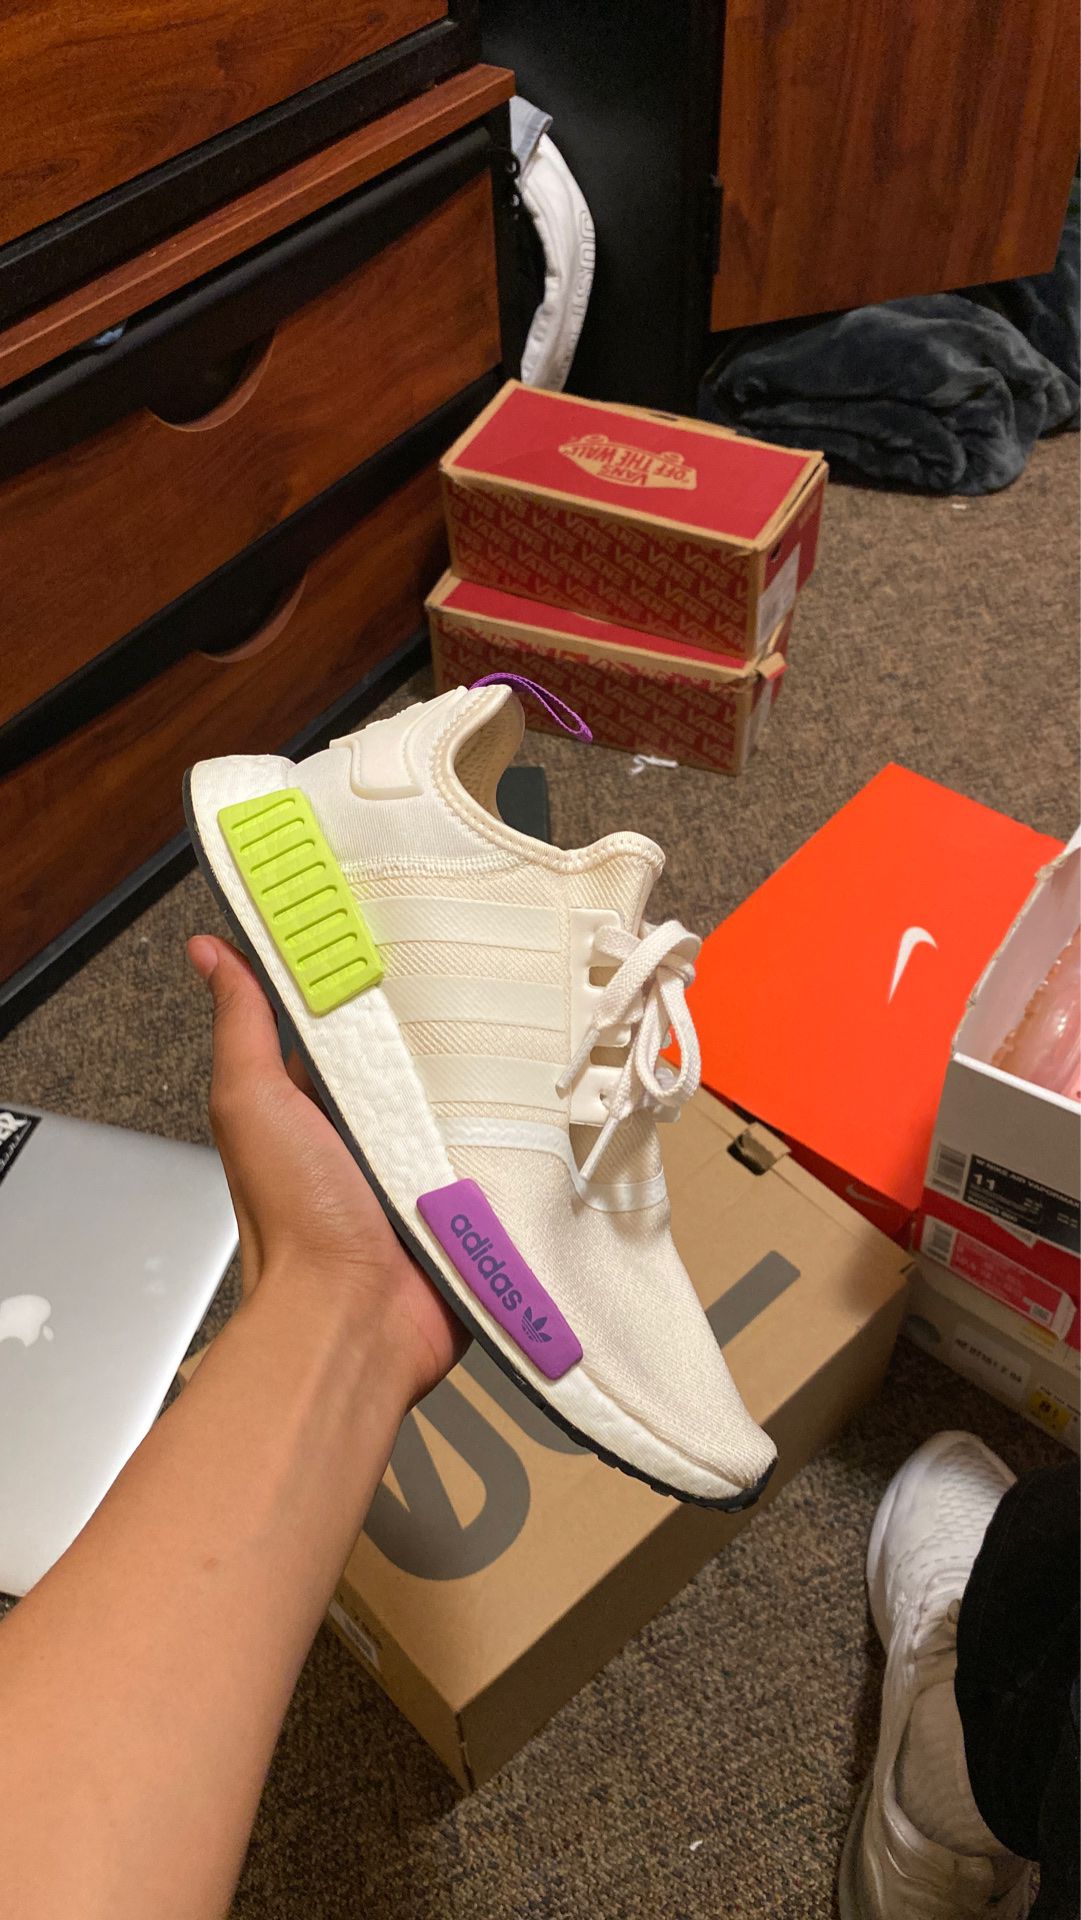 Nmd size 9